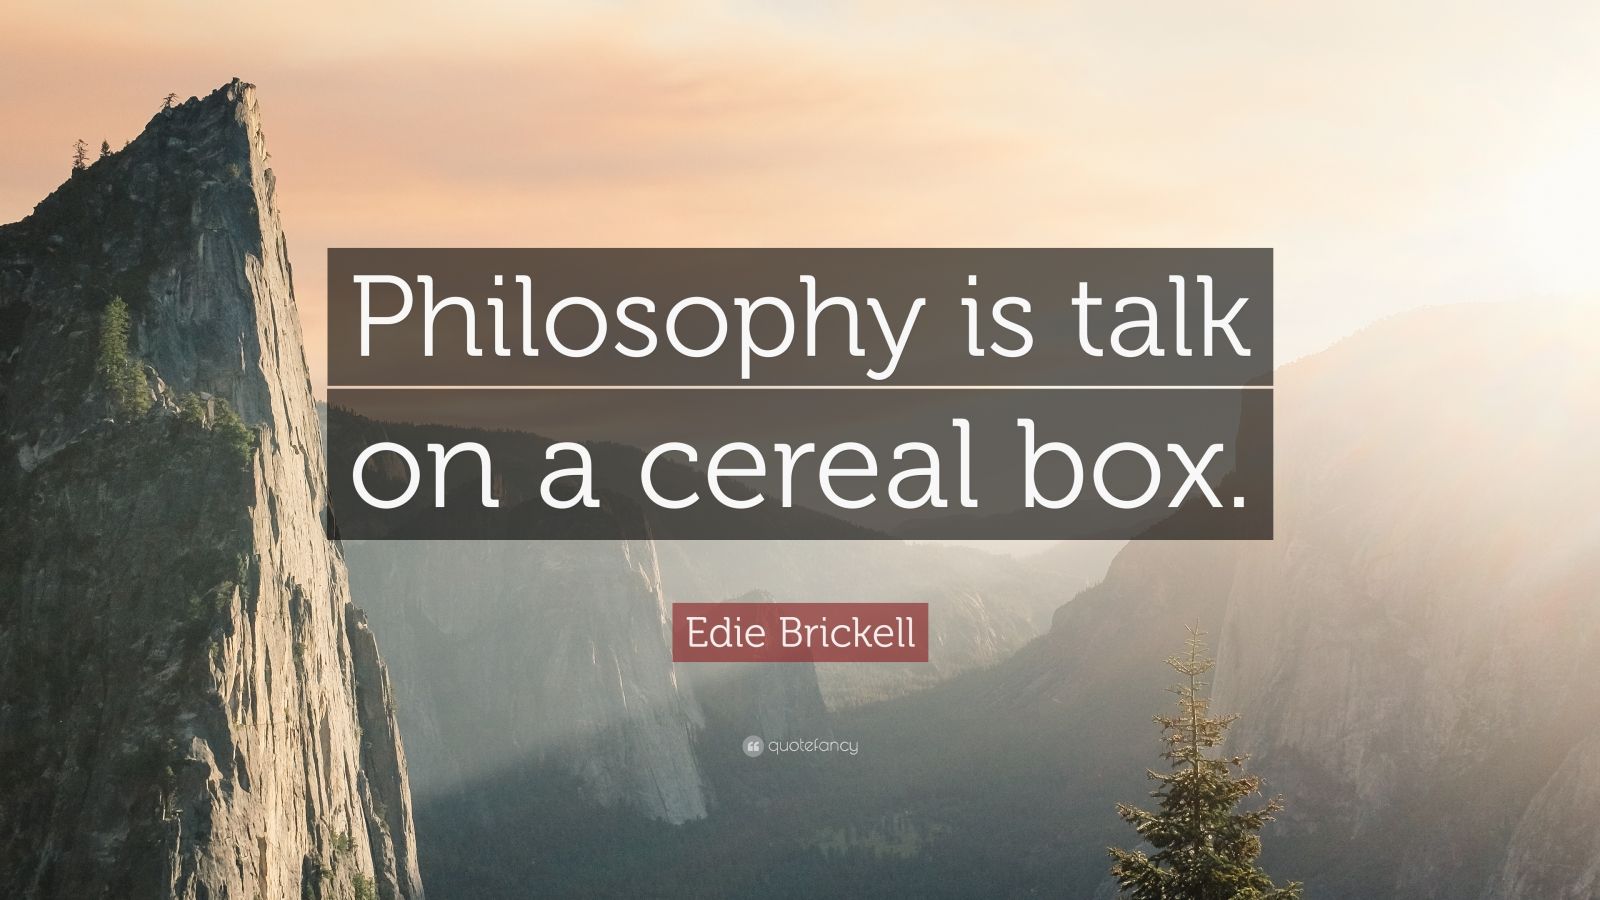 Edie Brickell Quote “Philosophy is talk on a cereal box.” (9